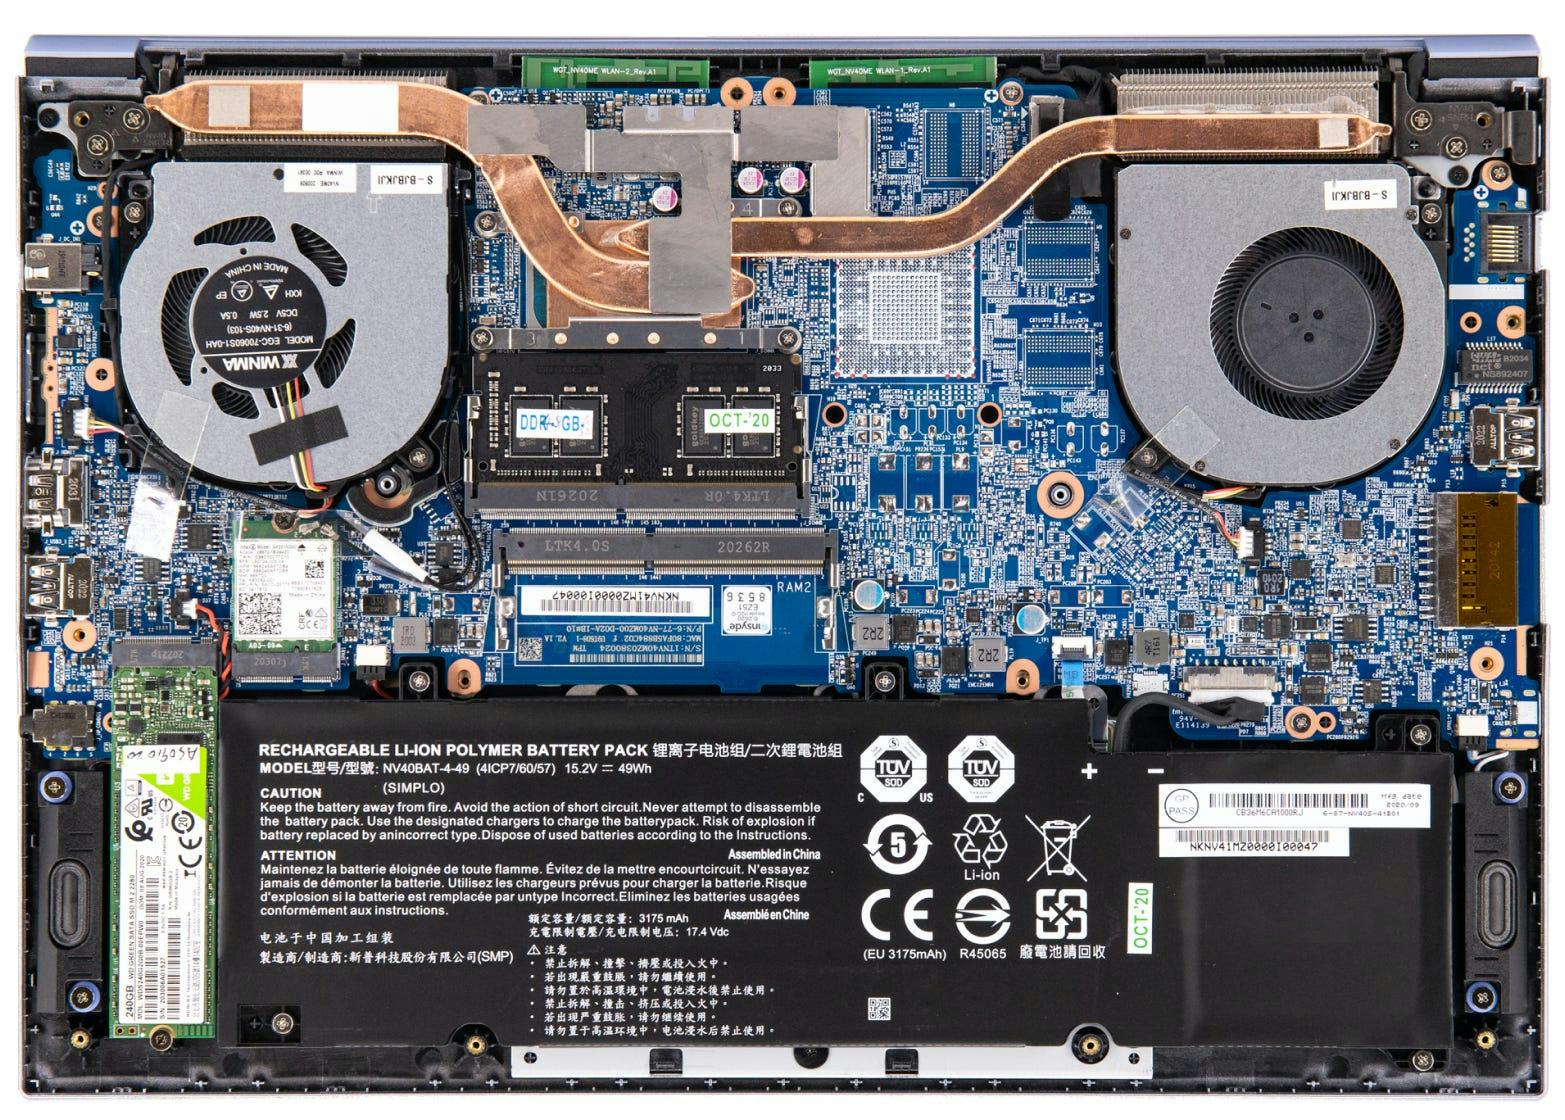 The inner workings of the Galago Pro laptop, with all hardware exposed. 